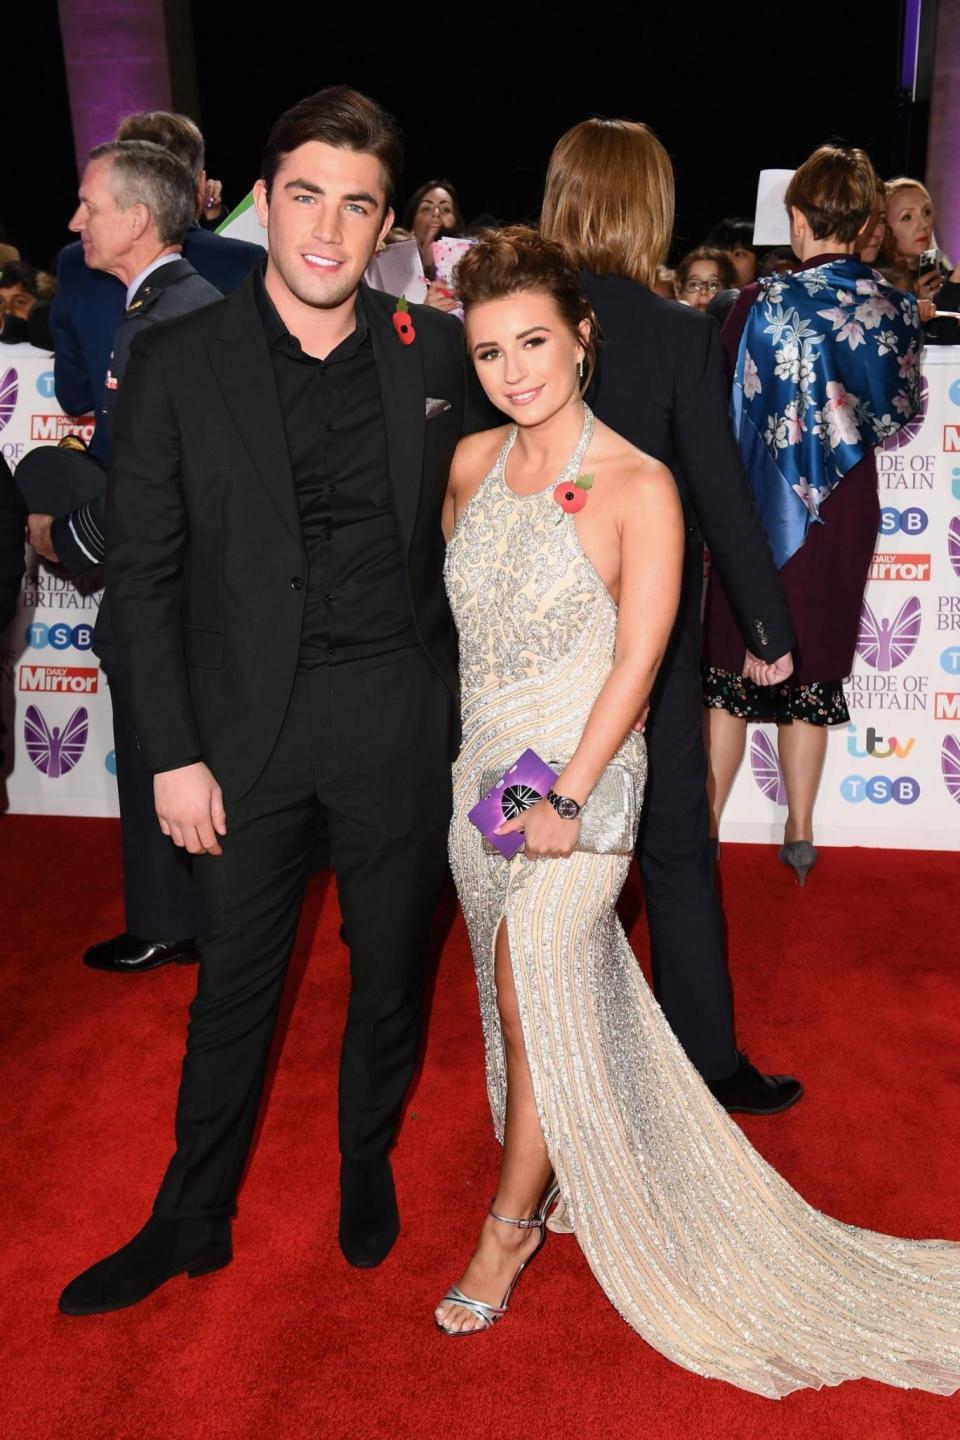 Hitting back: Dani Dyer and Jack Fincham have been plagued by split rumours (Jeff Spicer/Getty)